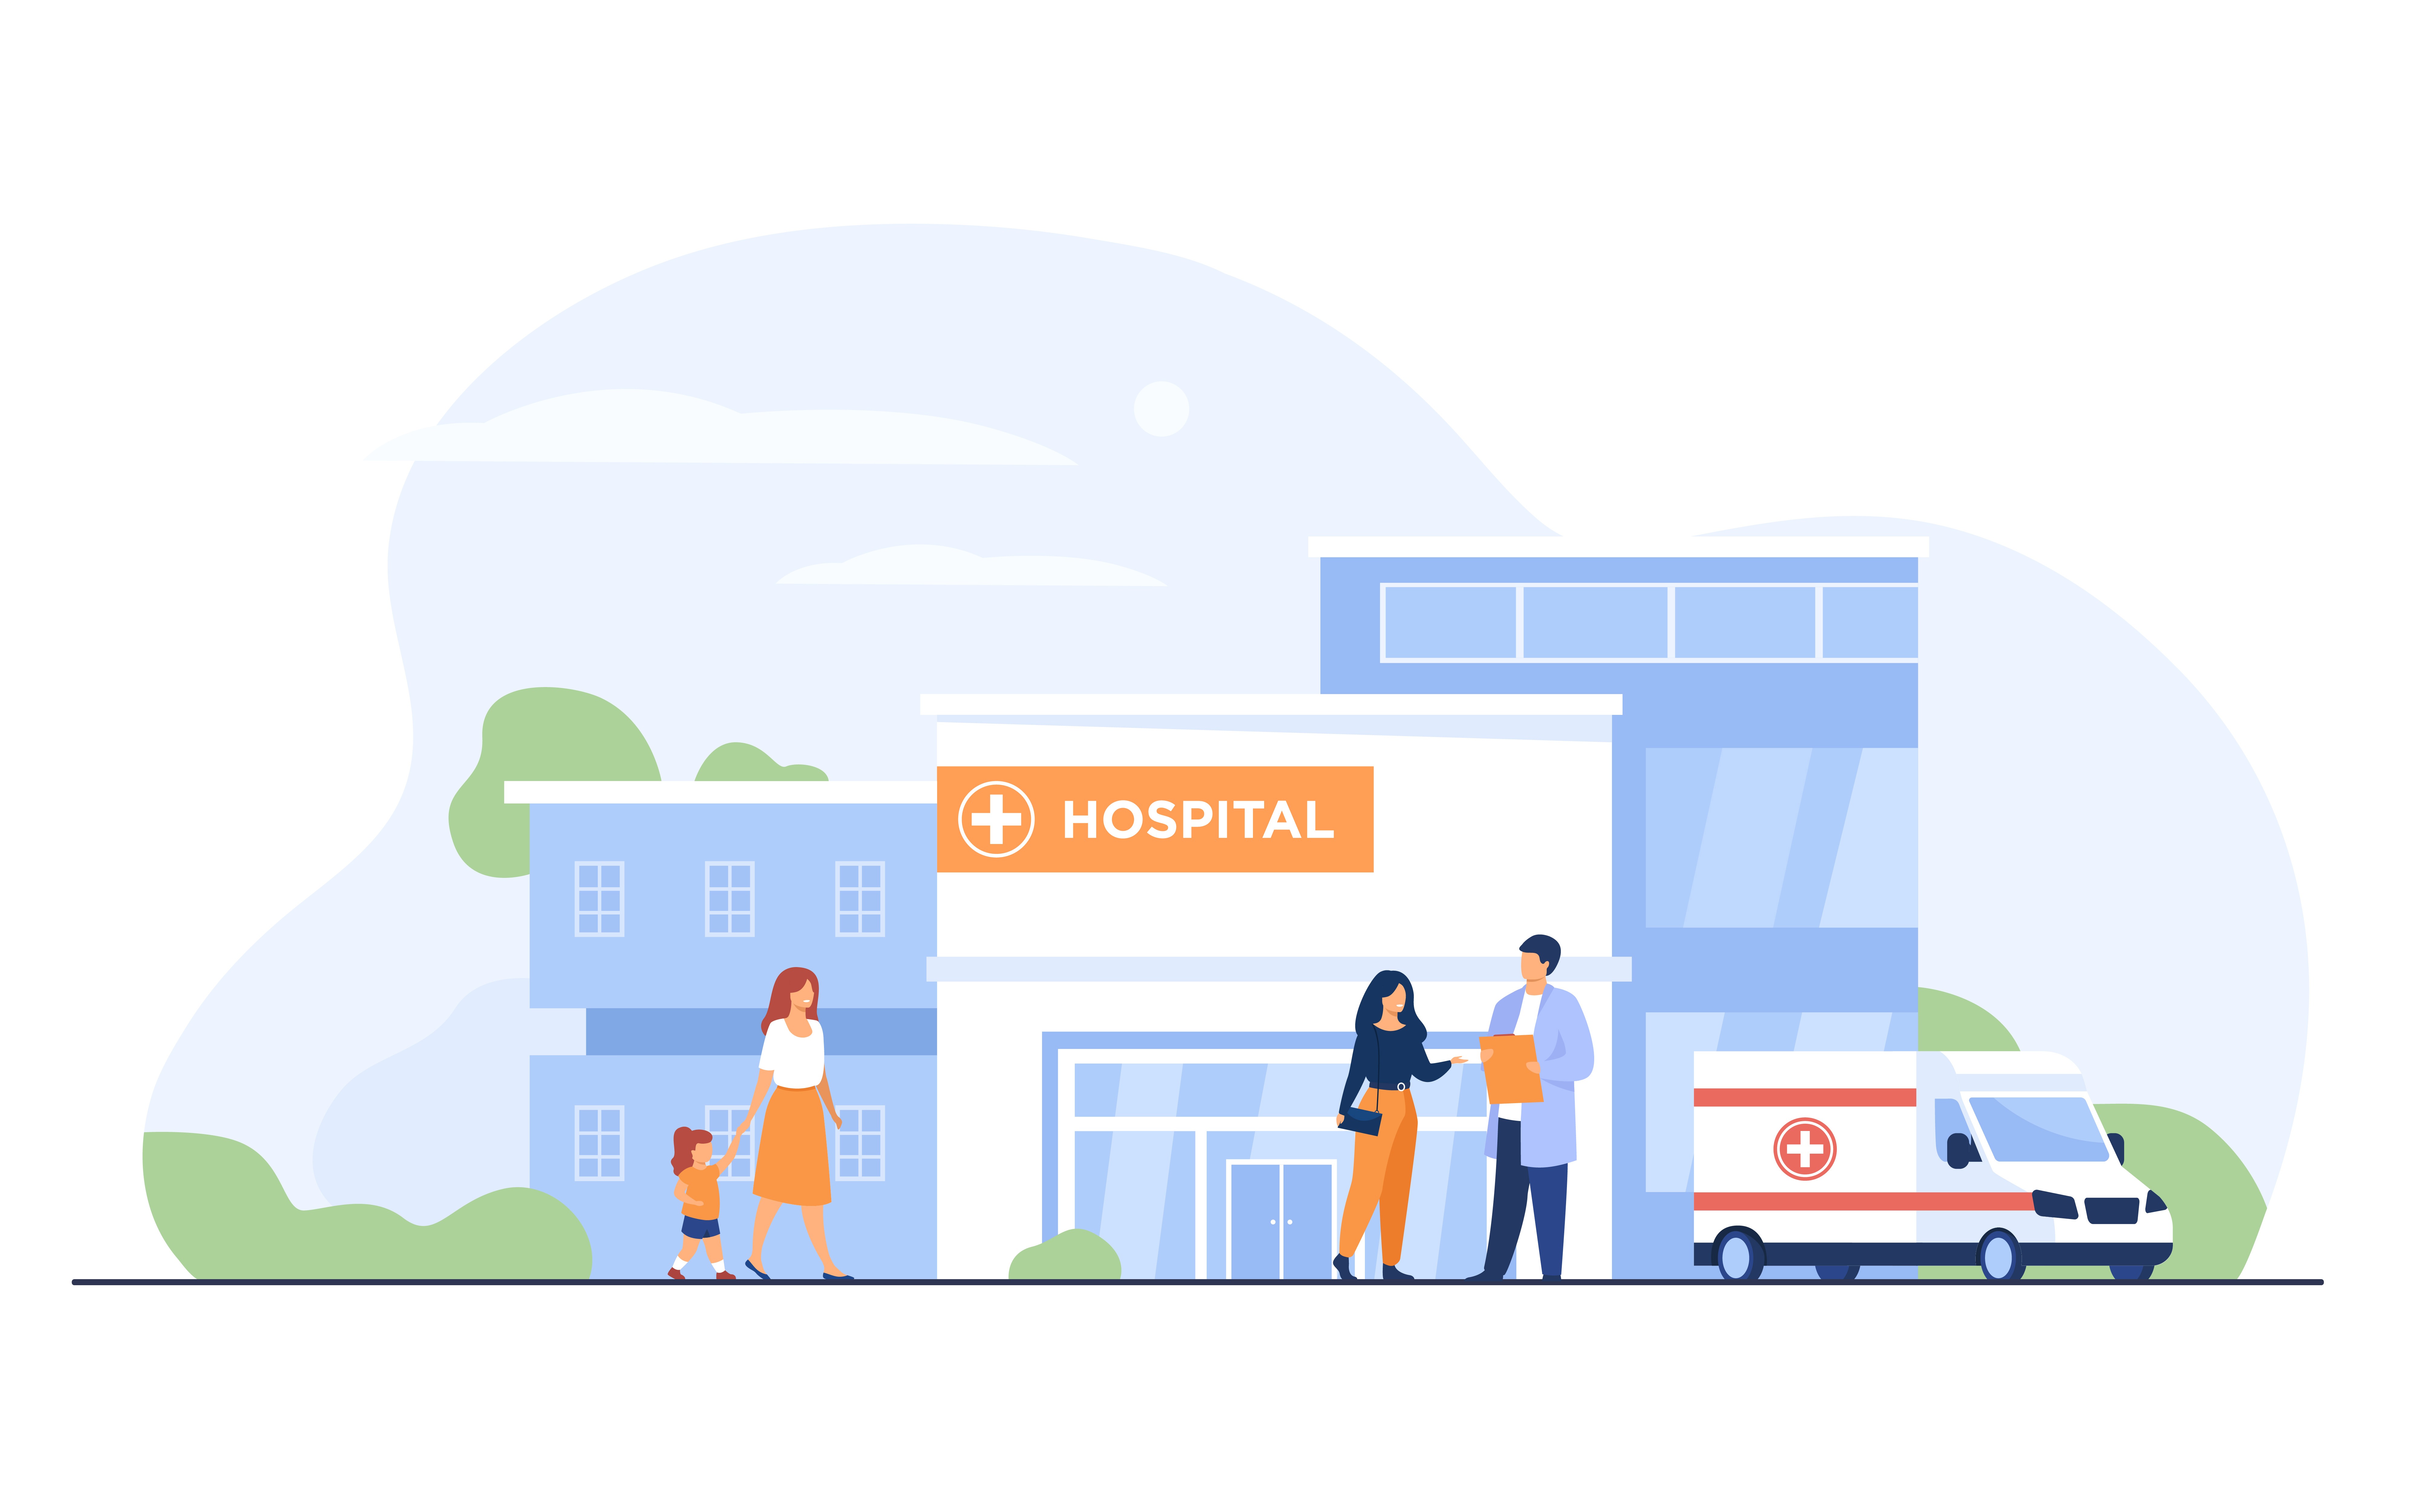 City hospital building. Patient talking to doctor at entrance, ambulance car parked at clinic. Can be used for emergency, medical care, health center concept